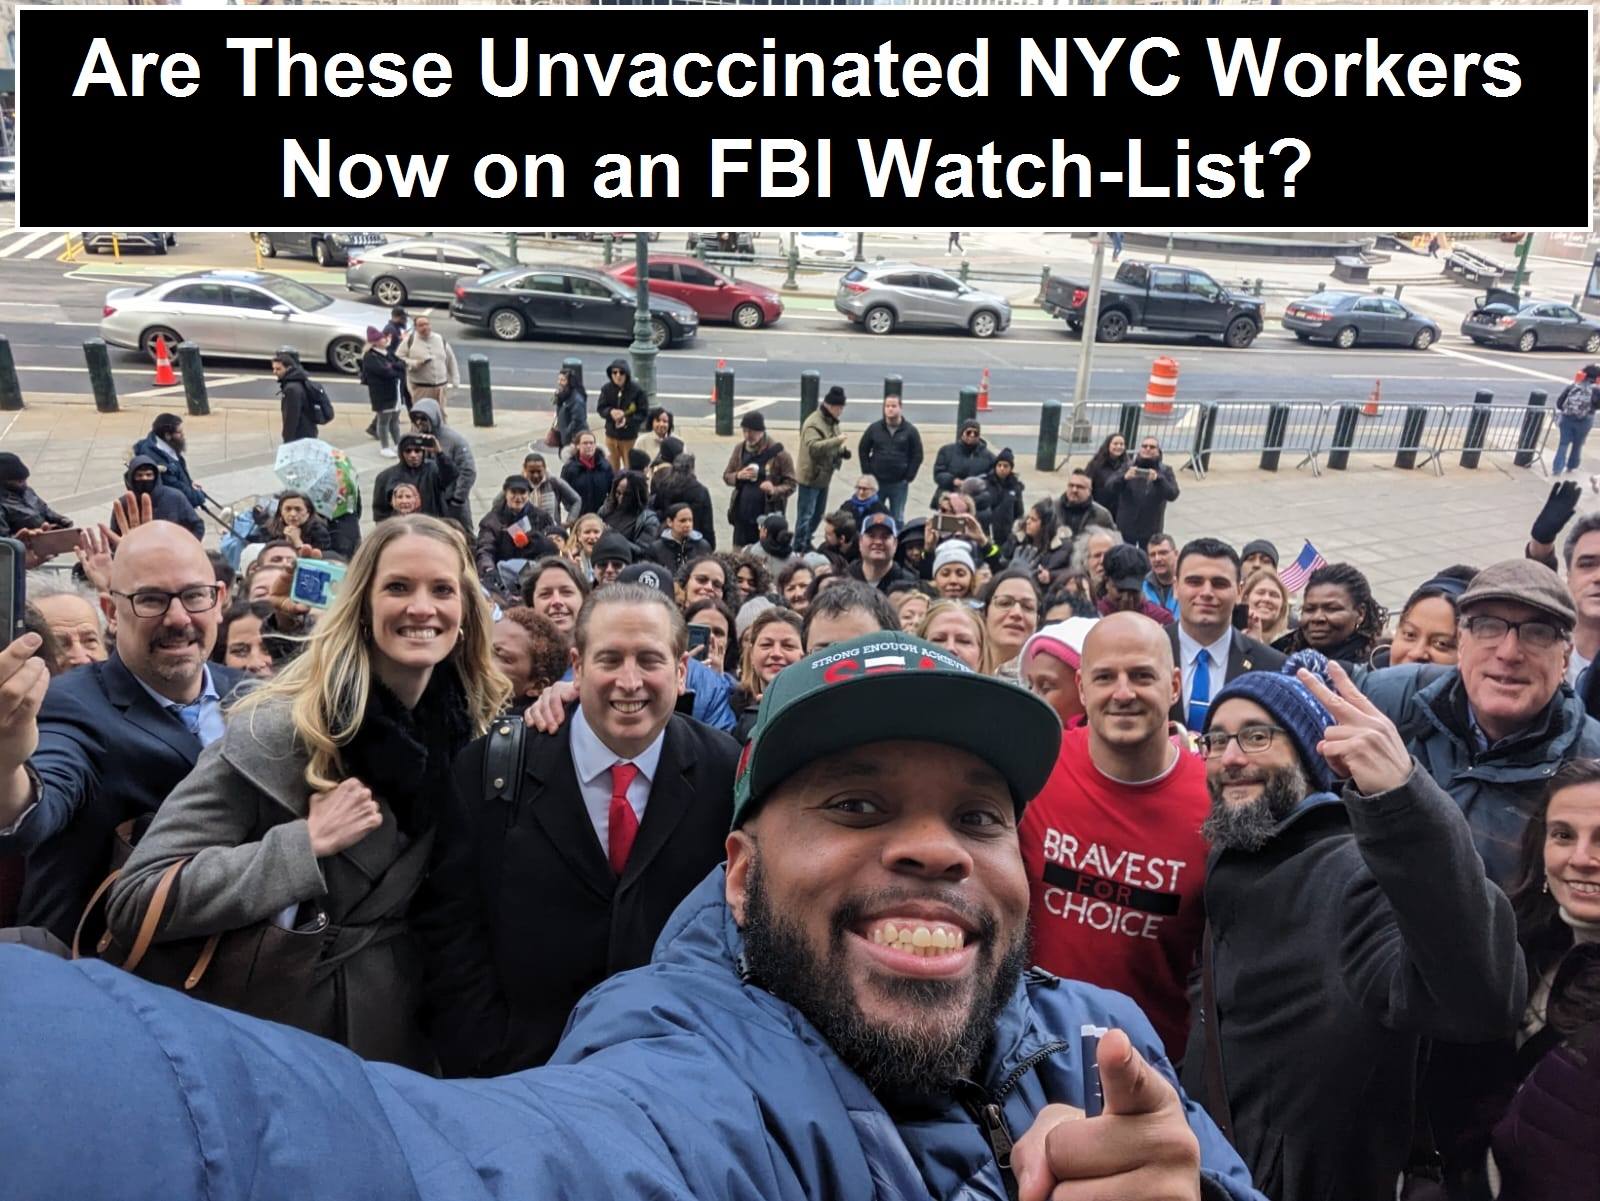 NYC workers not vaccinated